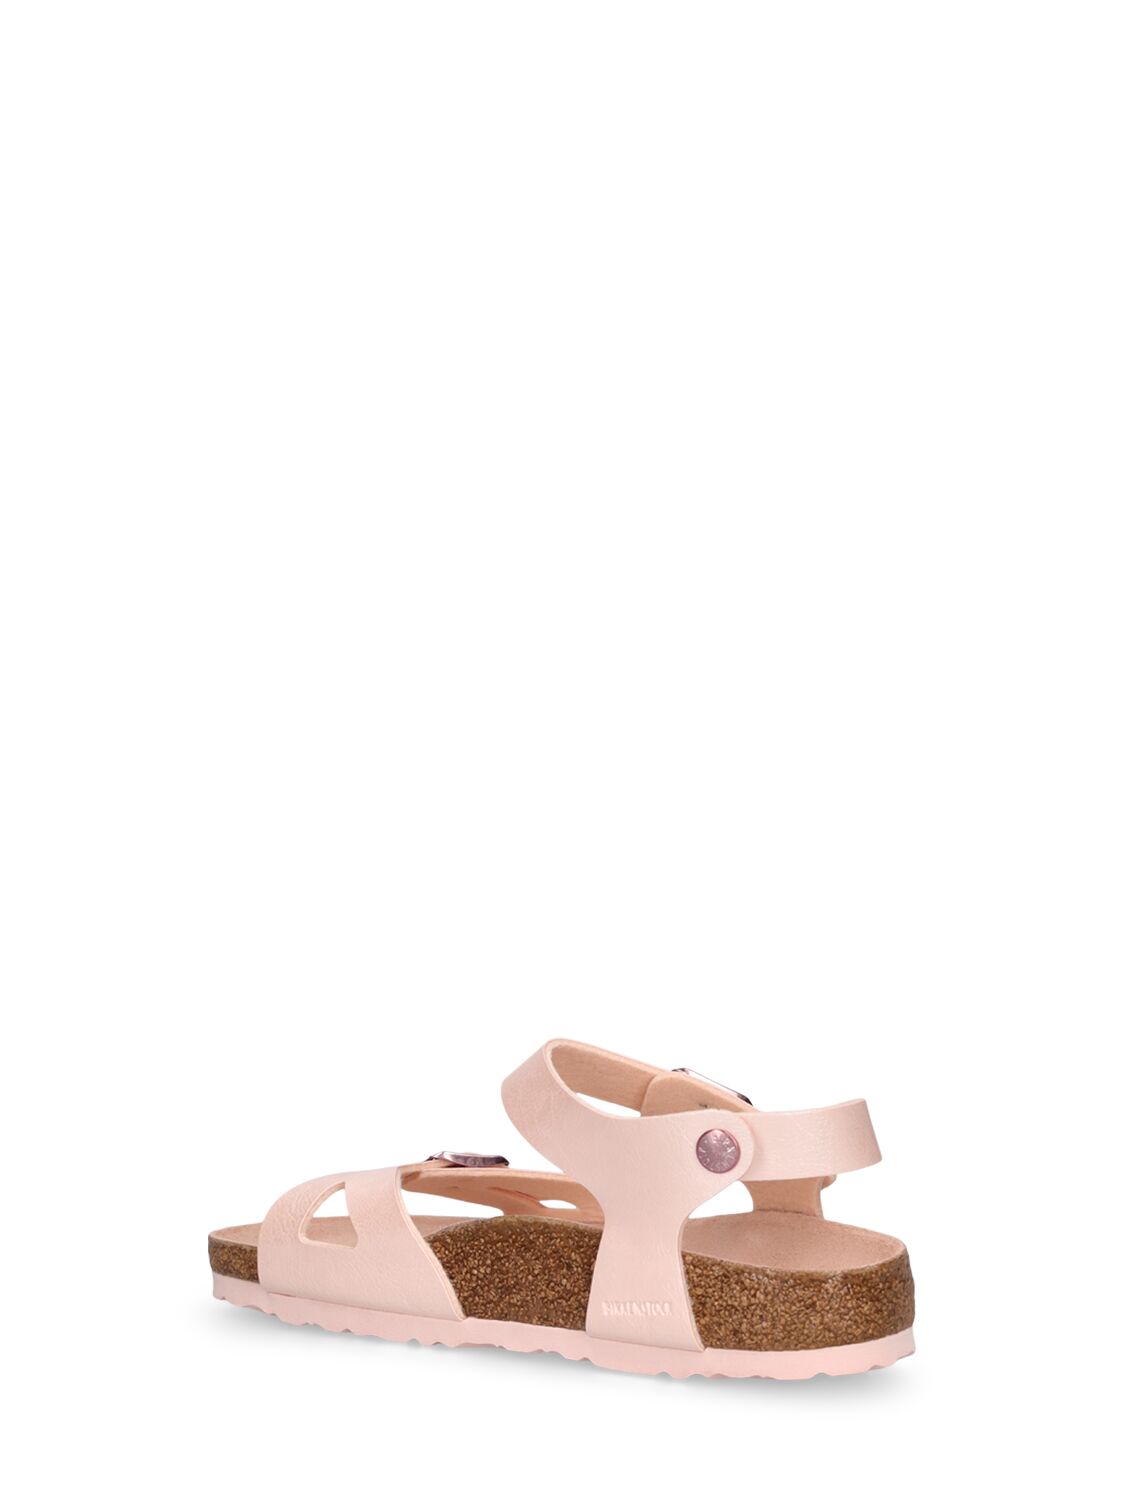 Shop Birkenstock Rio Faux Leather Sandals In Pink